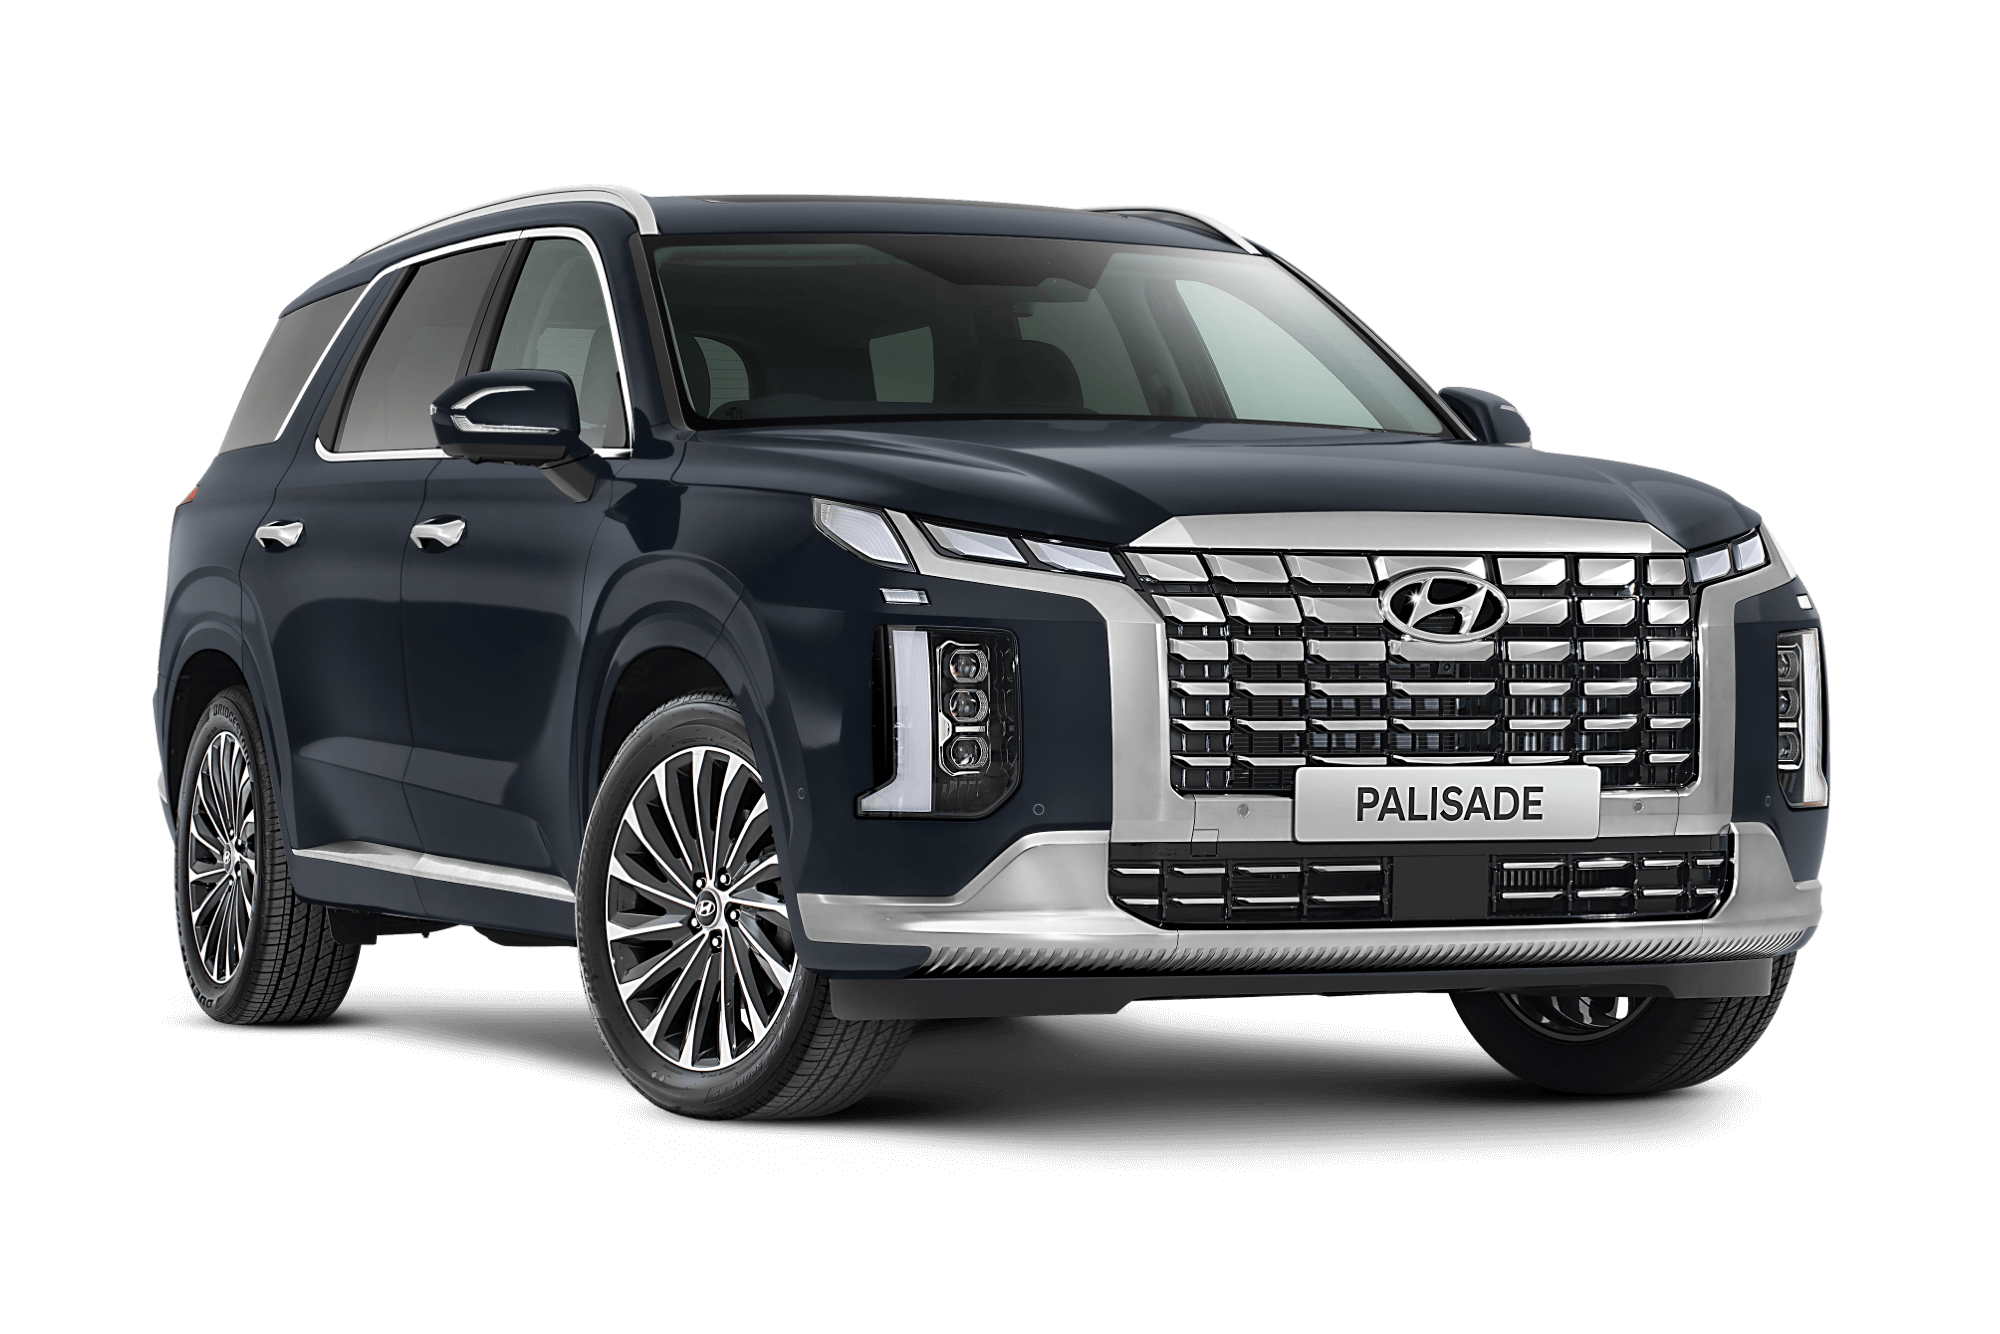 A Year After Being Fixed, Does Our 2020 Hyundai Palisade Still